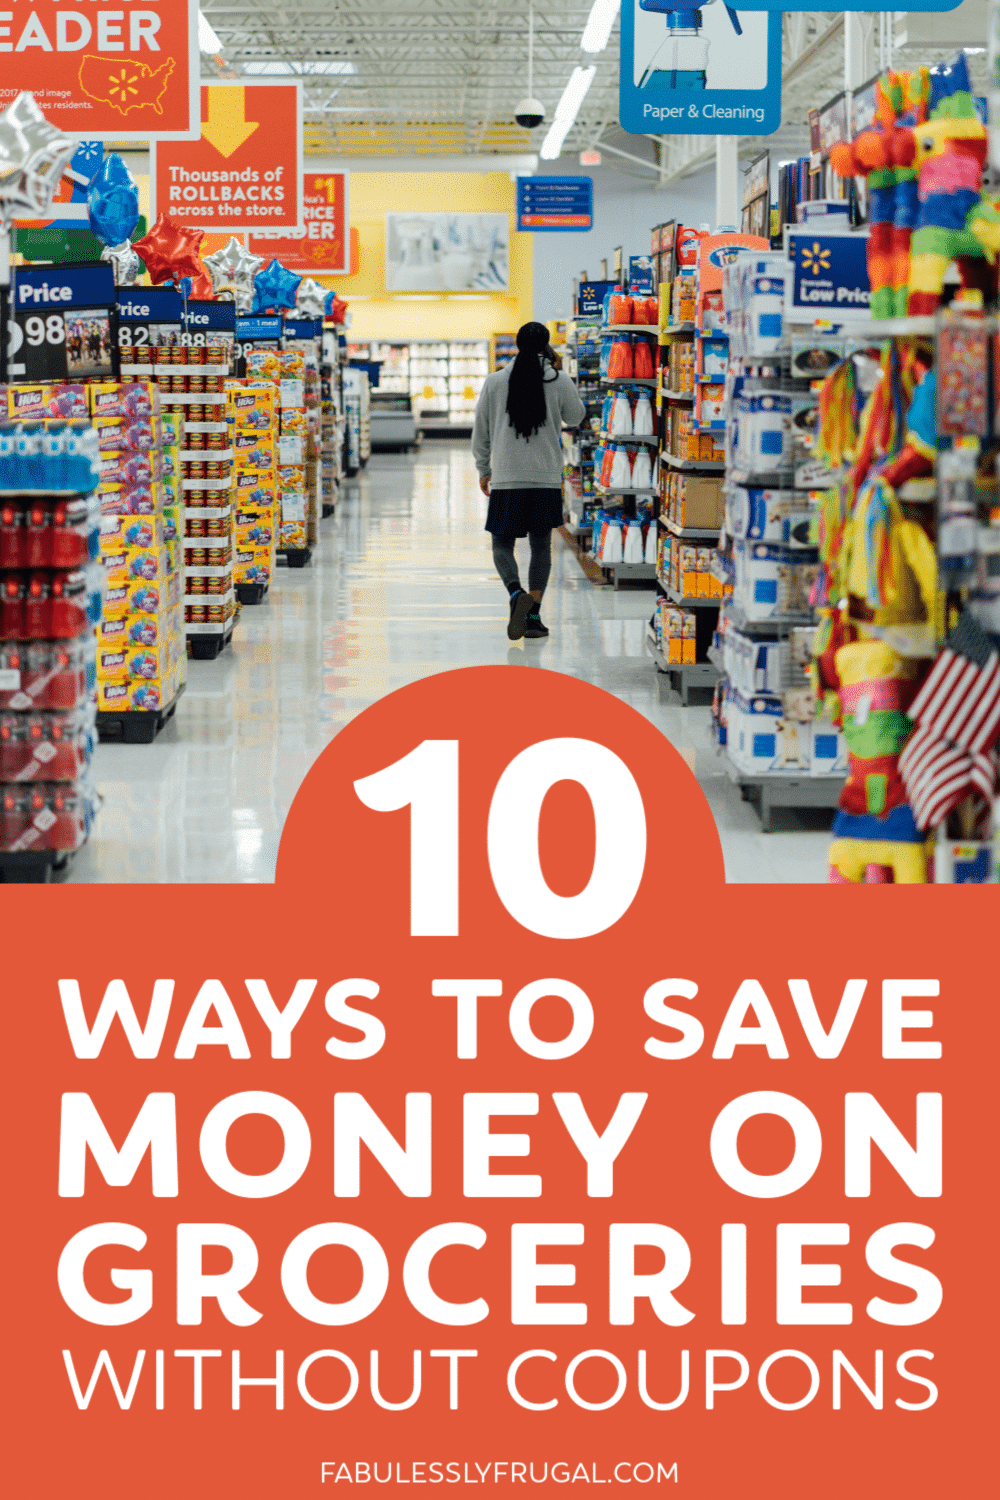 Ways to save money on groceries without coupons